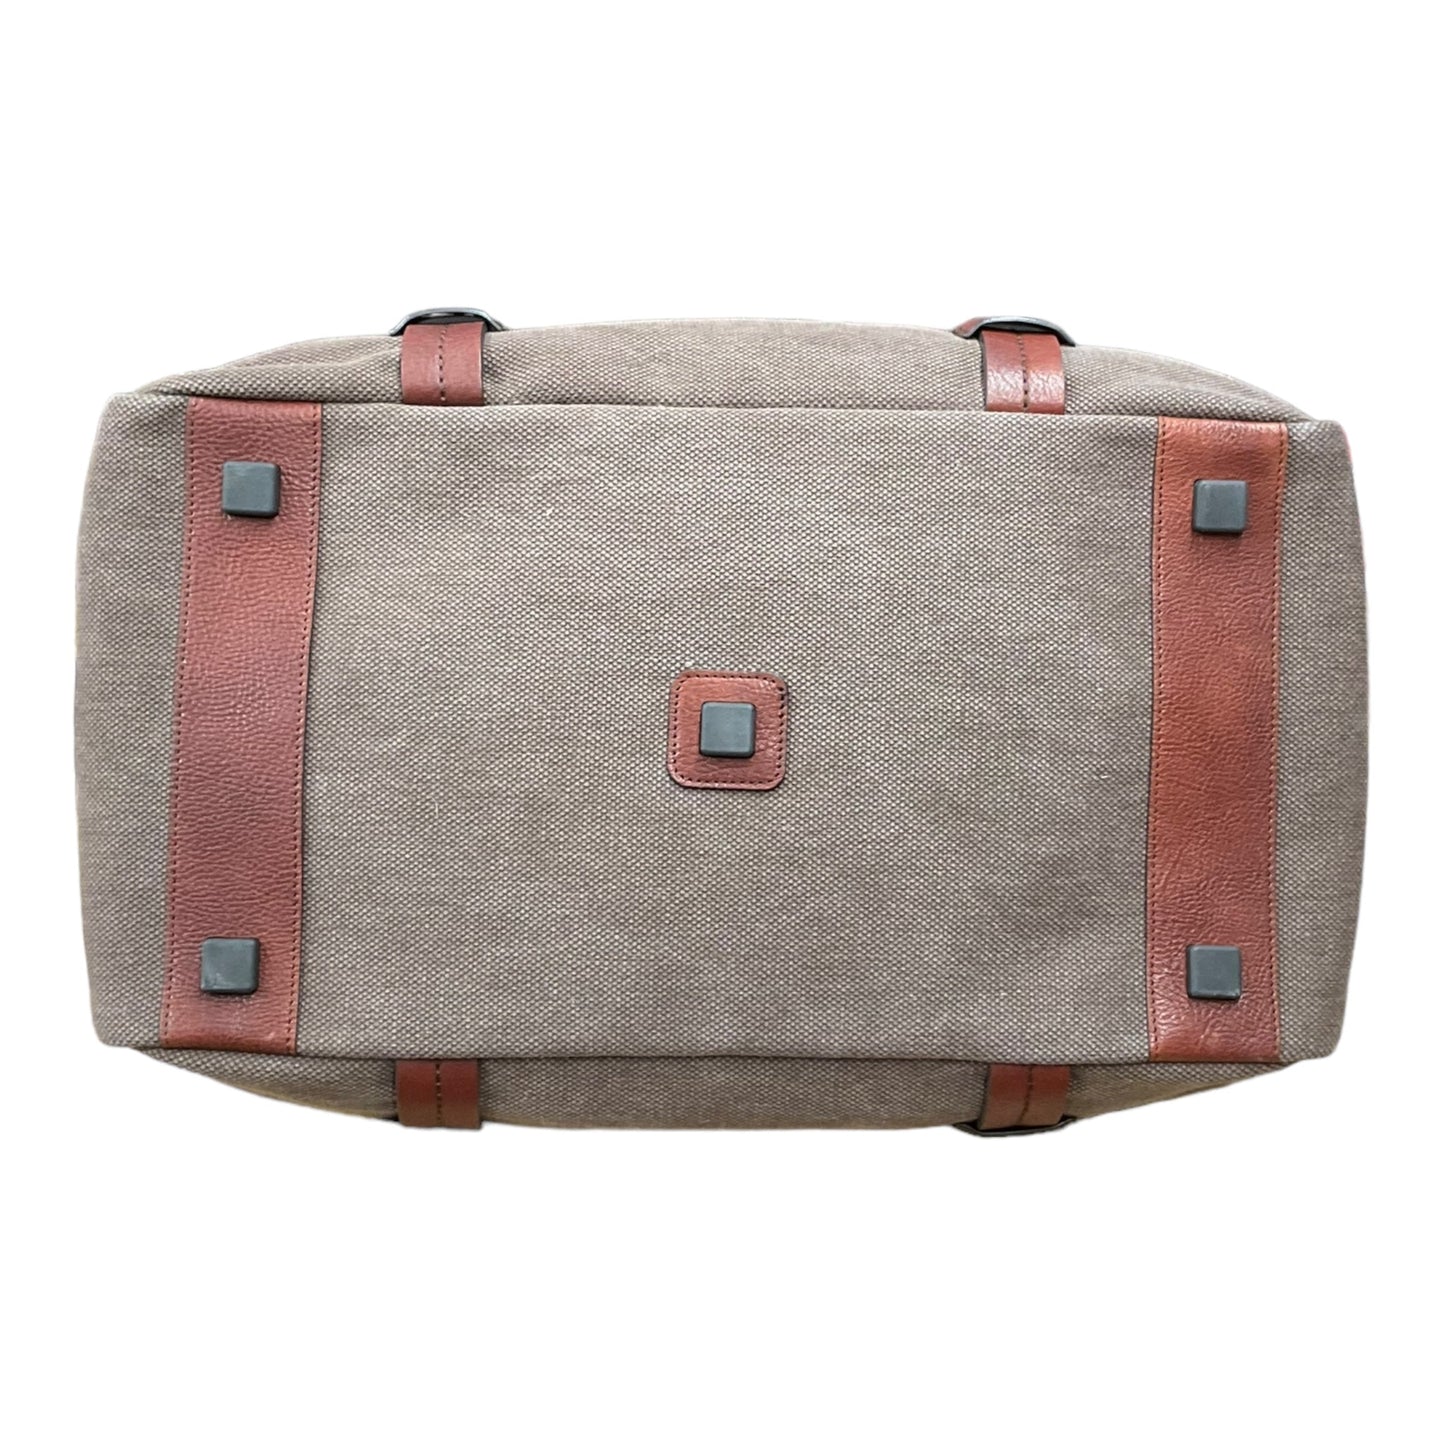 Duffle And Weekender Designer By Cmb  Size: Medium